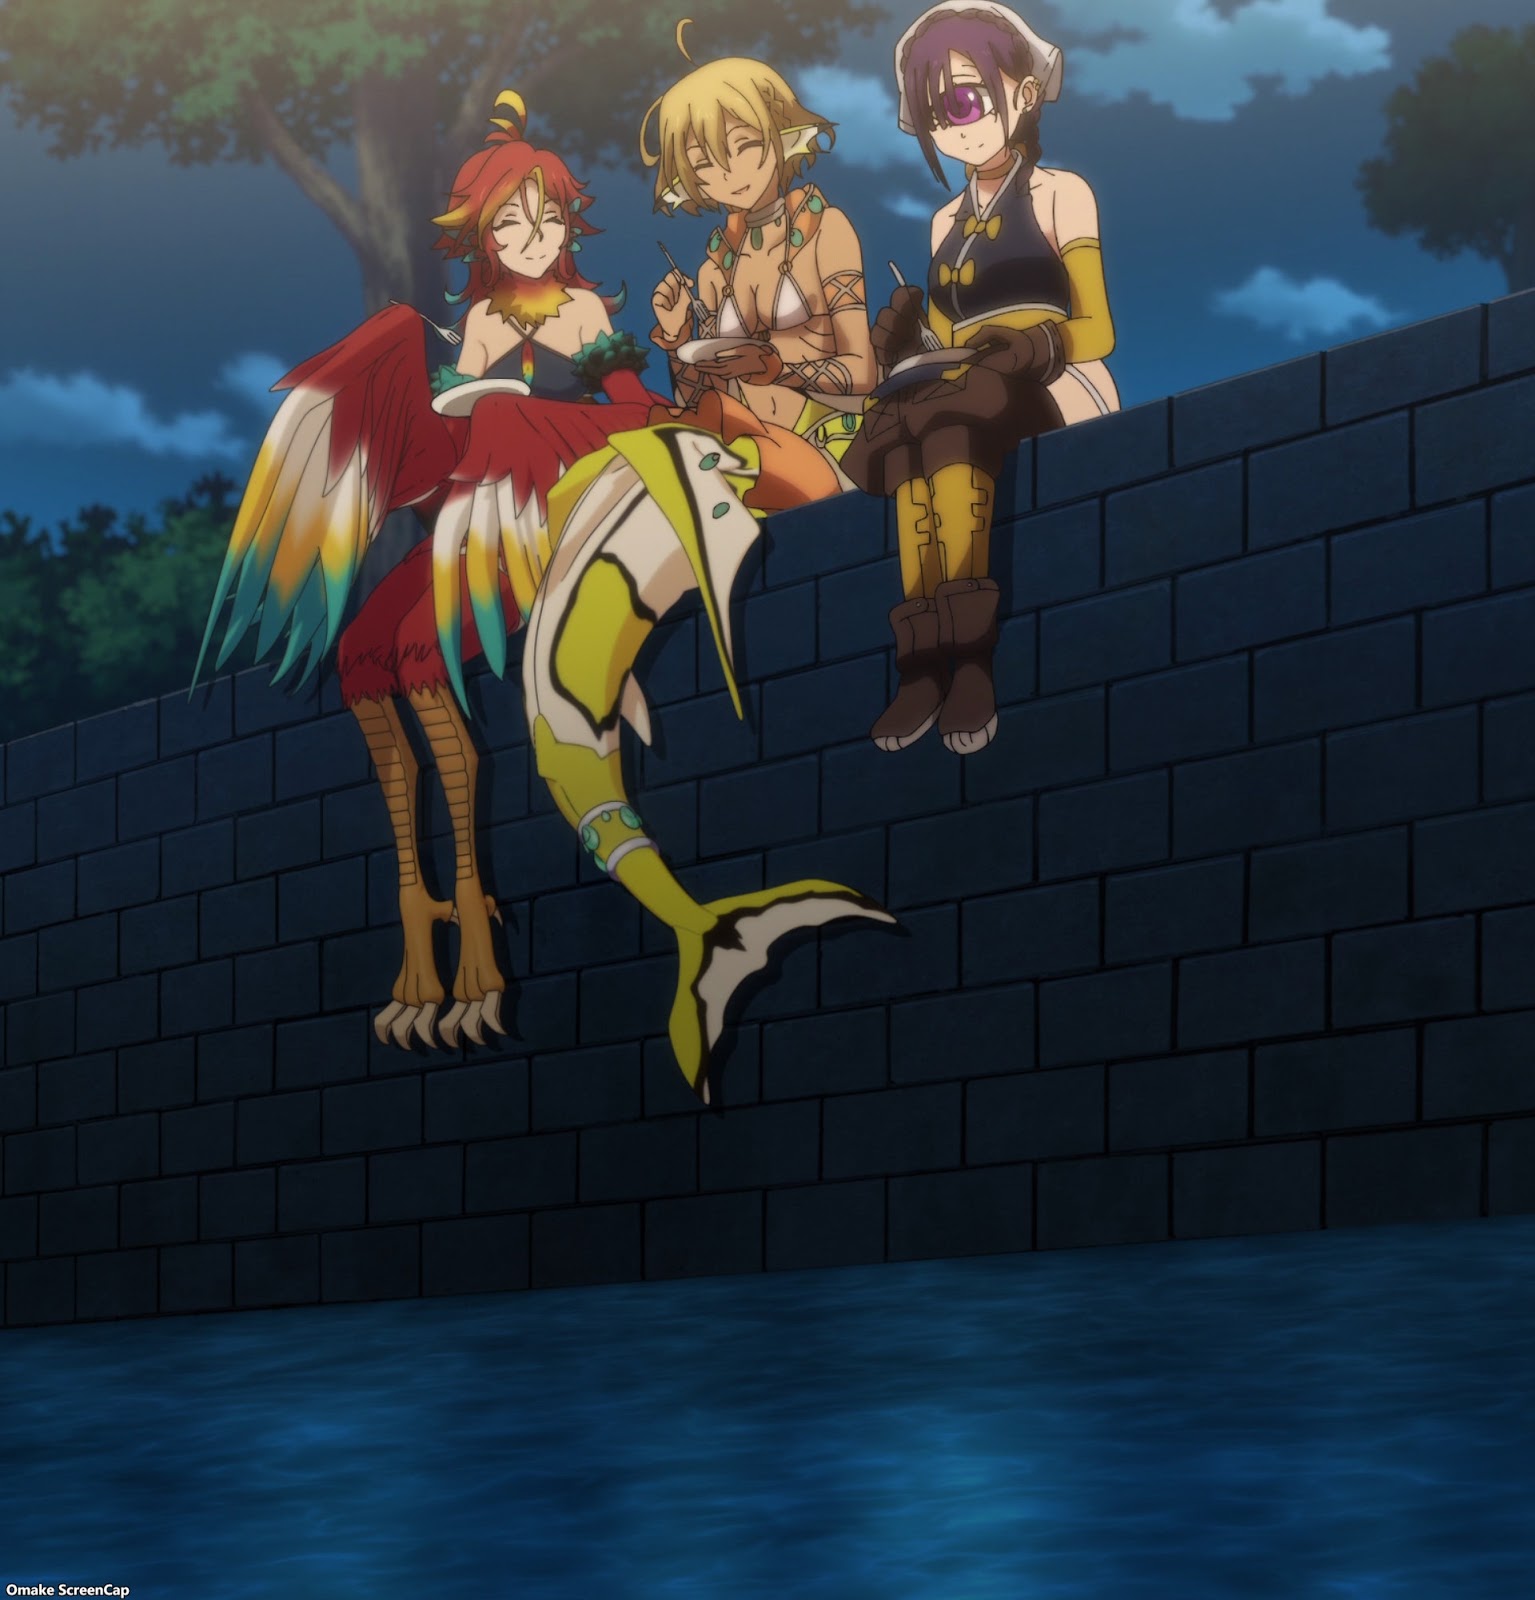 Monster Musume no Oisha-san - Episode 9 discussion : r/anime